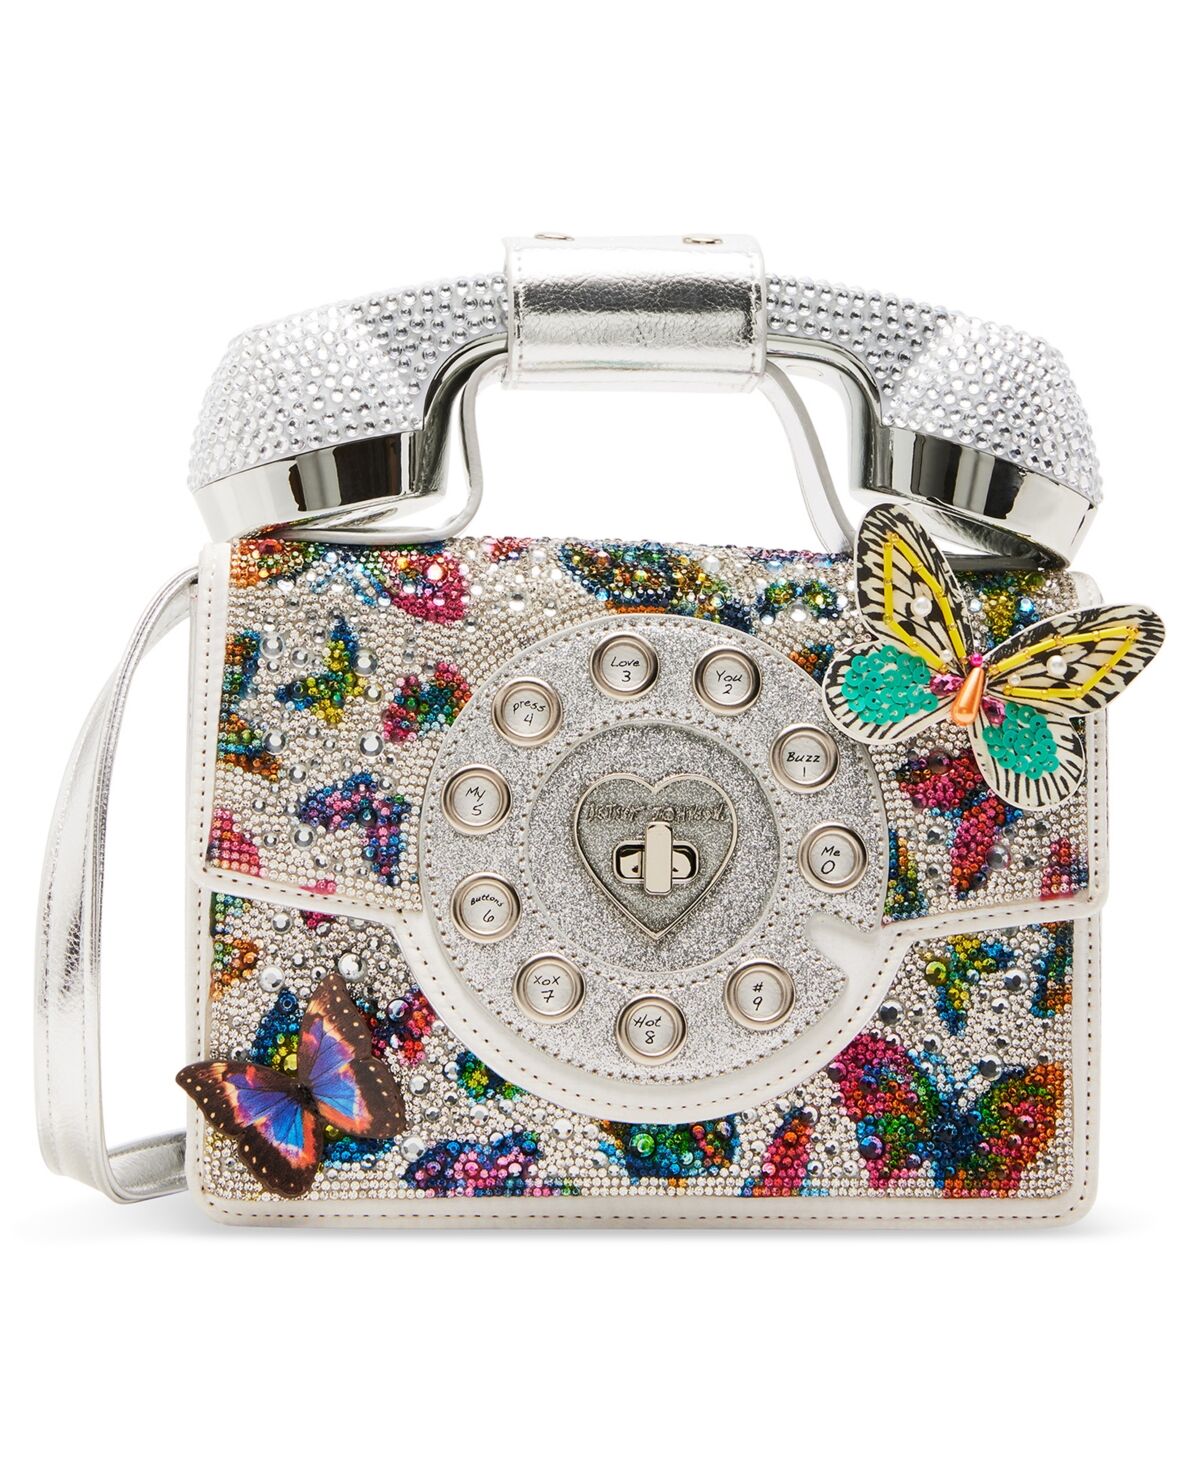 Betsey Johnson Butterfly Phone Bag - Silver Multi